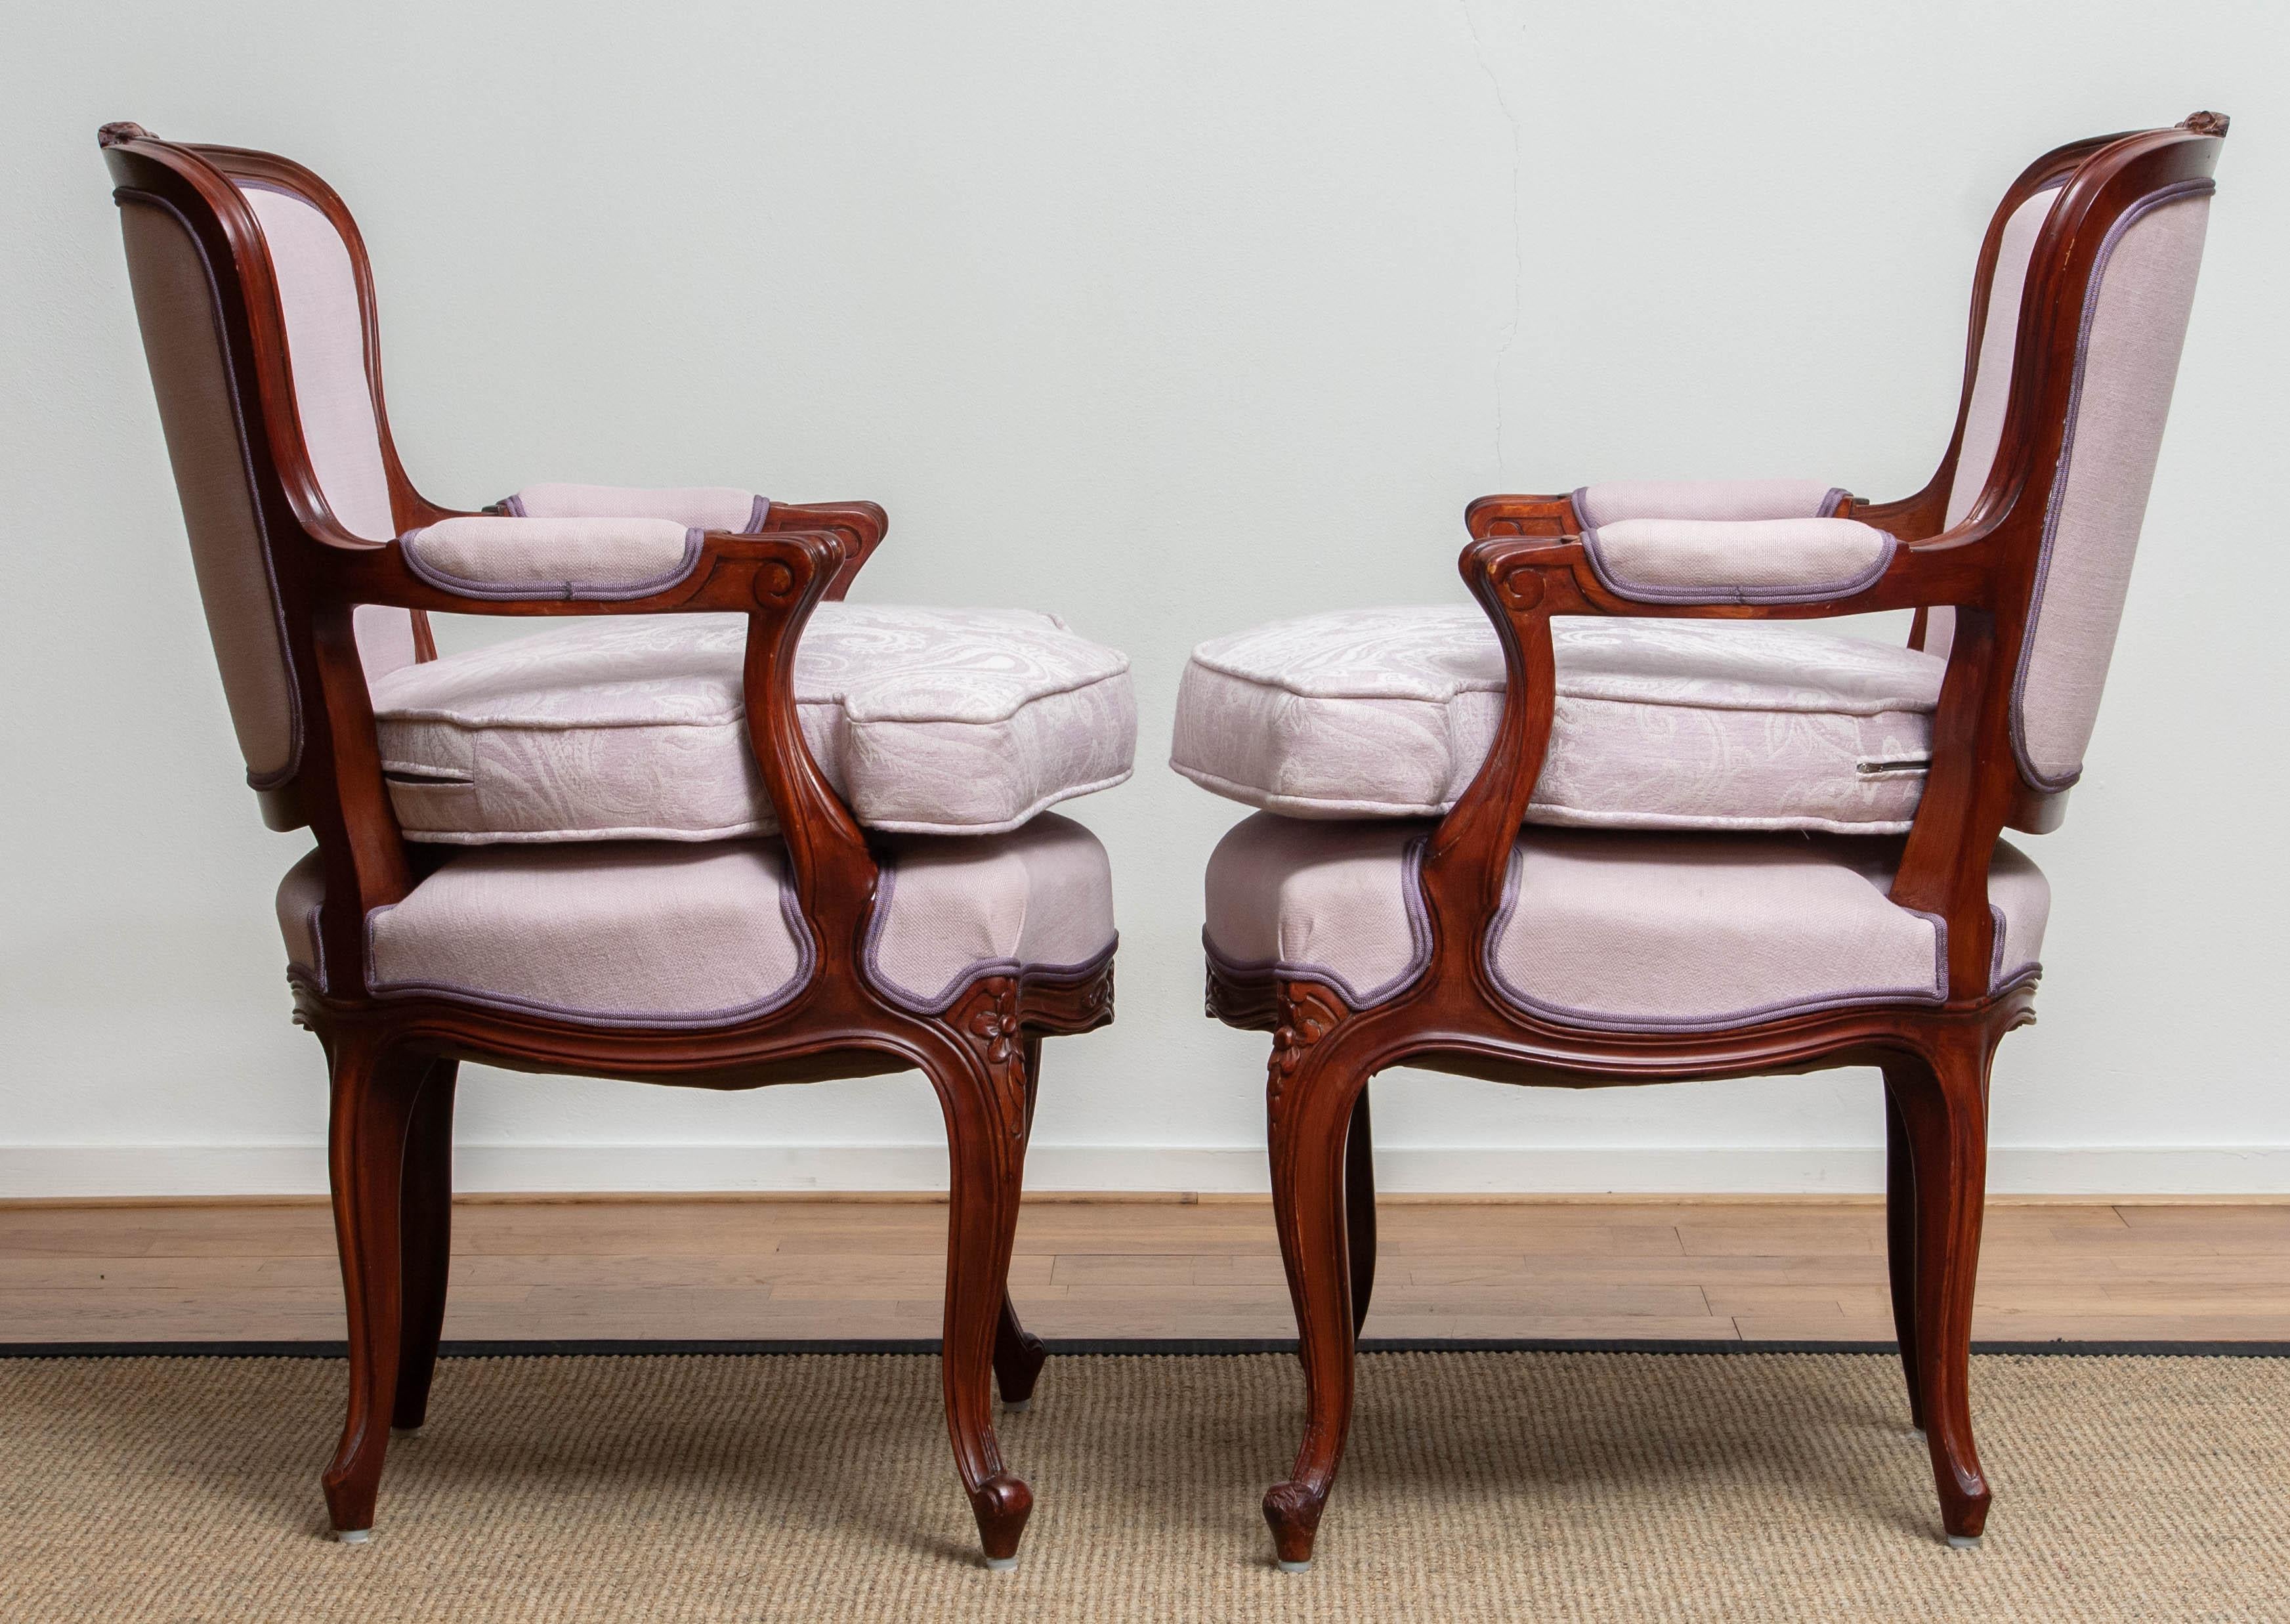 1950 Pair of Pink Swedish Rococo Bergères in the Shabby Chic Technique Chairs F 3